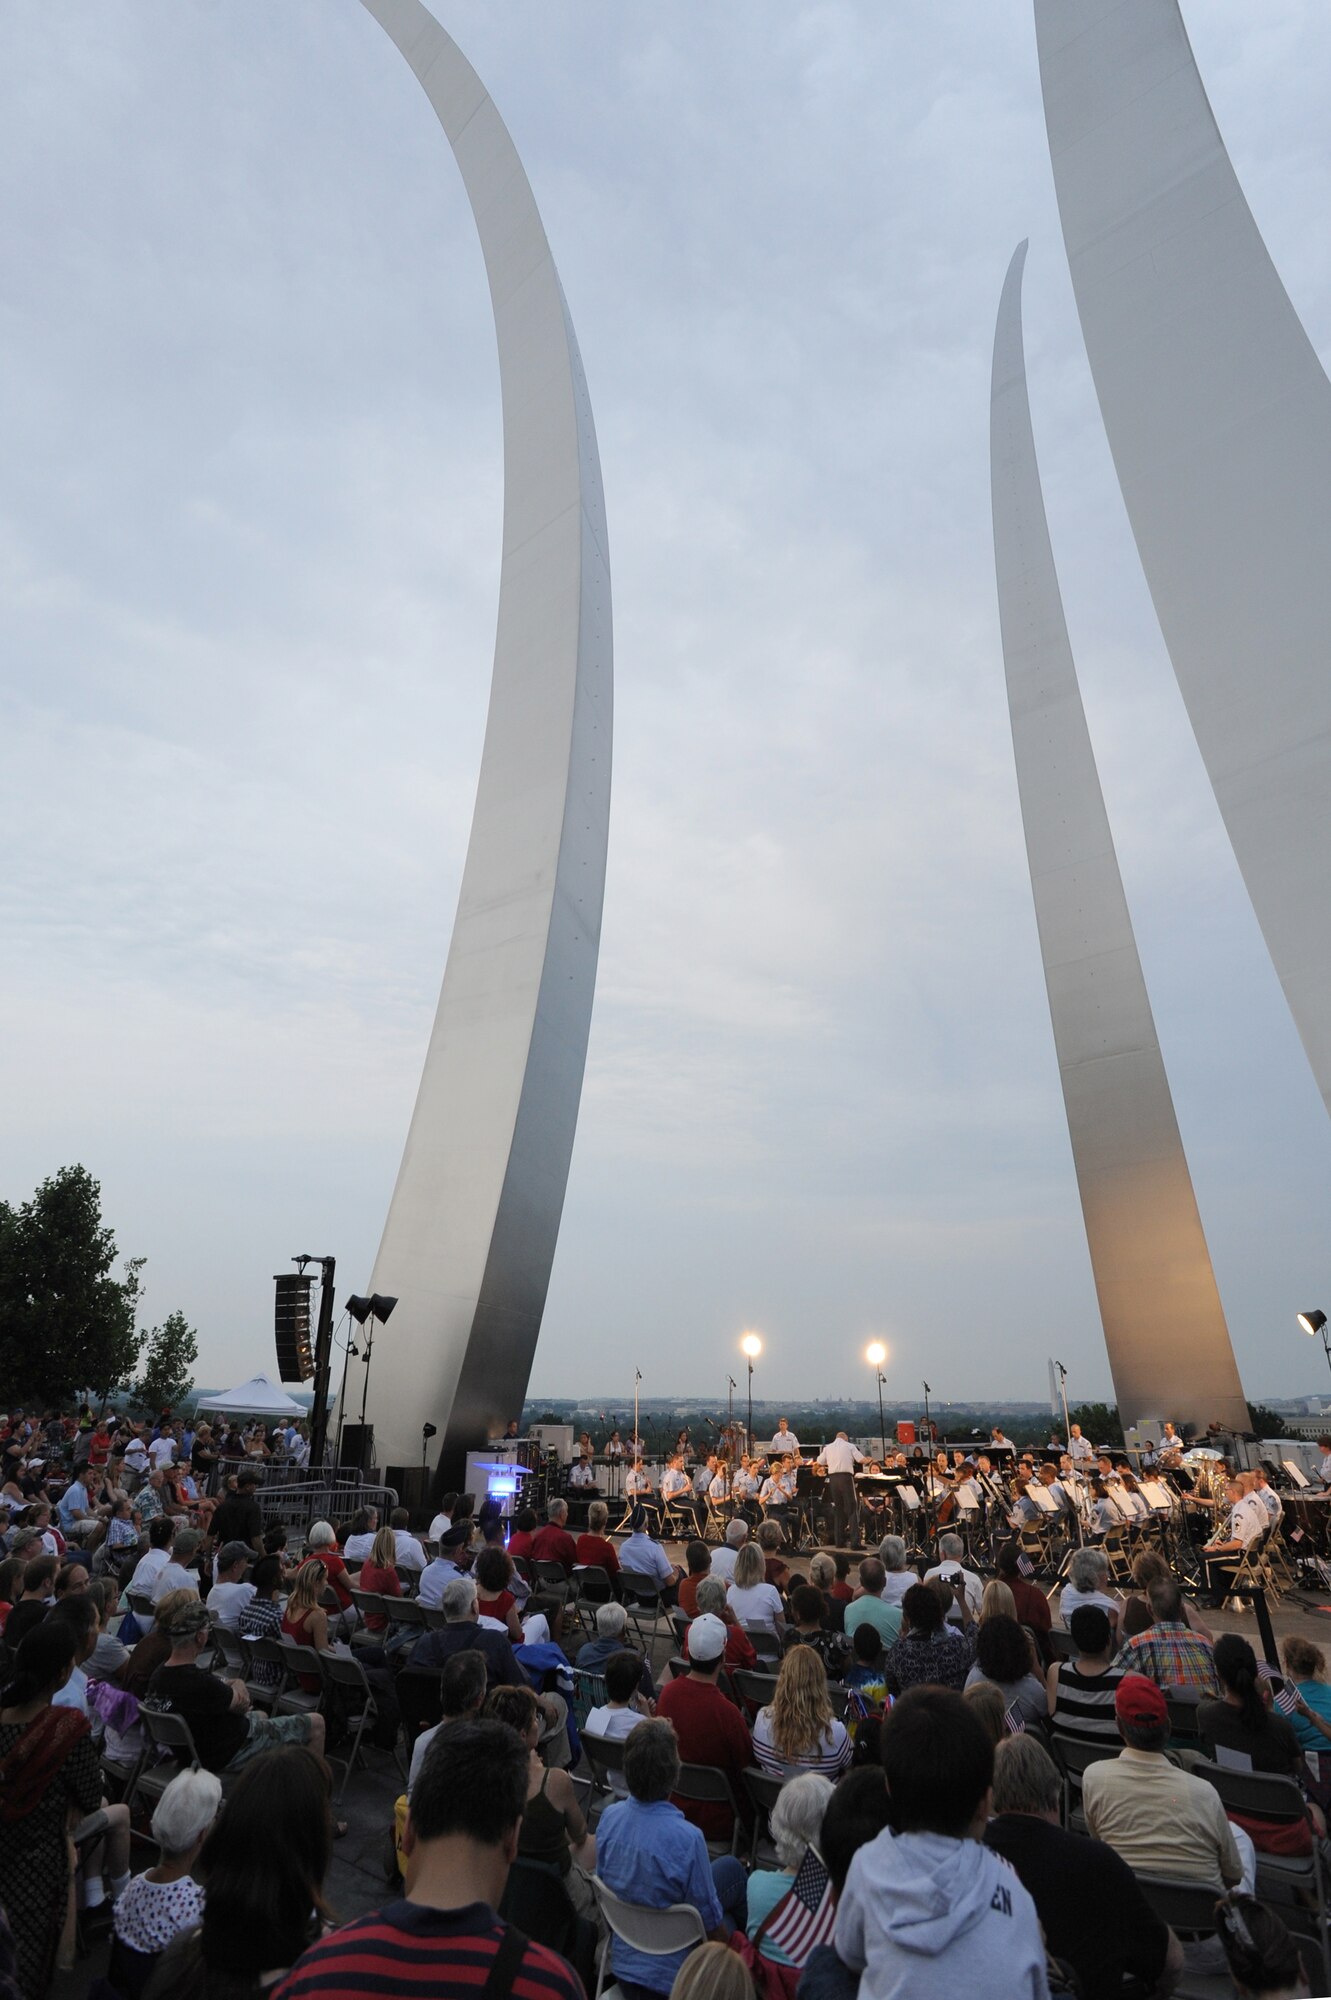 The U.S. Air Force Band performs at the Air Force Memorial, Arlington, Va., in honor of Independence Day July 4. The USAF Band’s performance honored service members, past and present. (U.S. Air Force photo by Staff Sgt. Christopher Ruano)